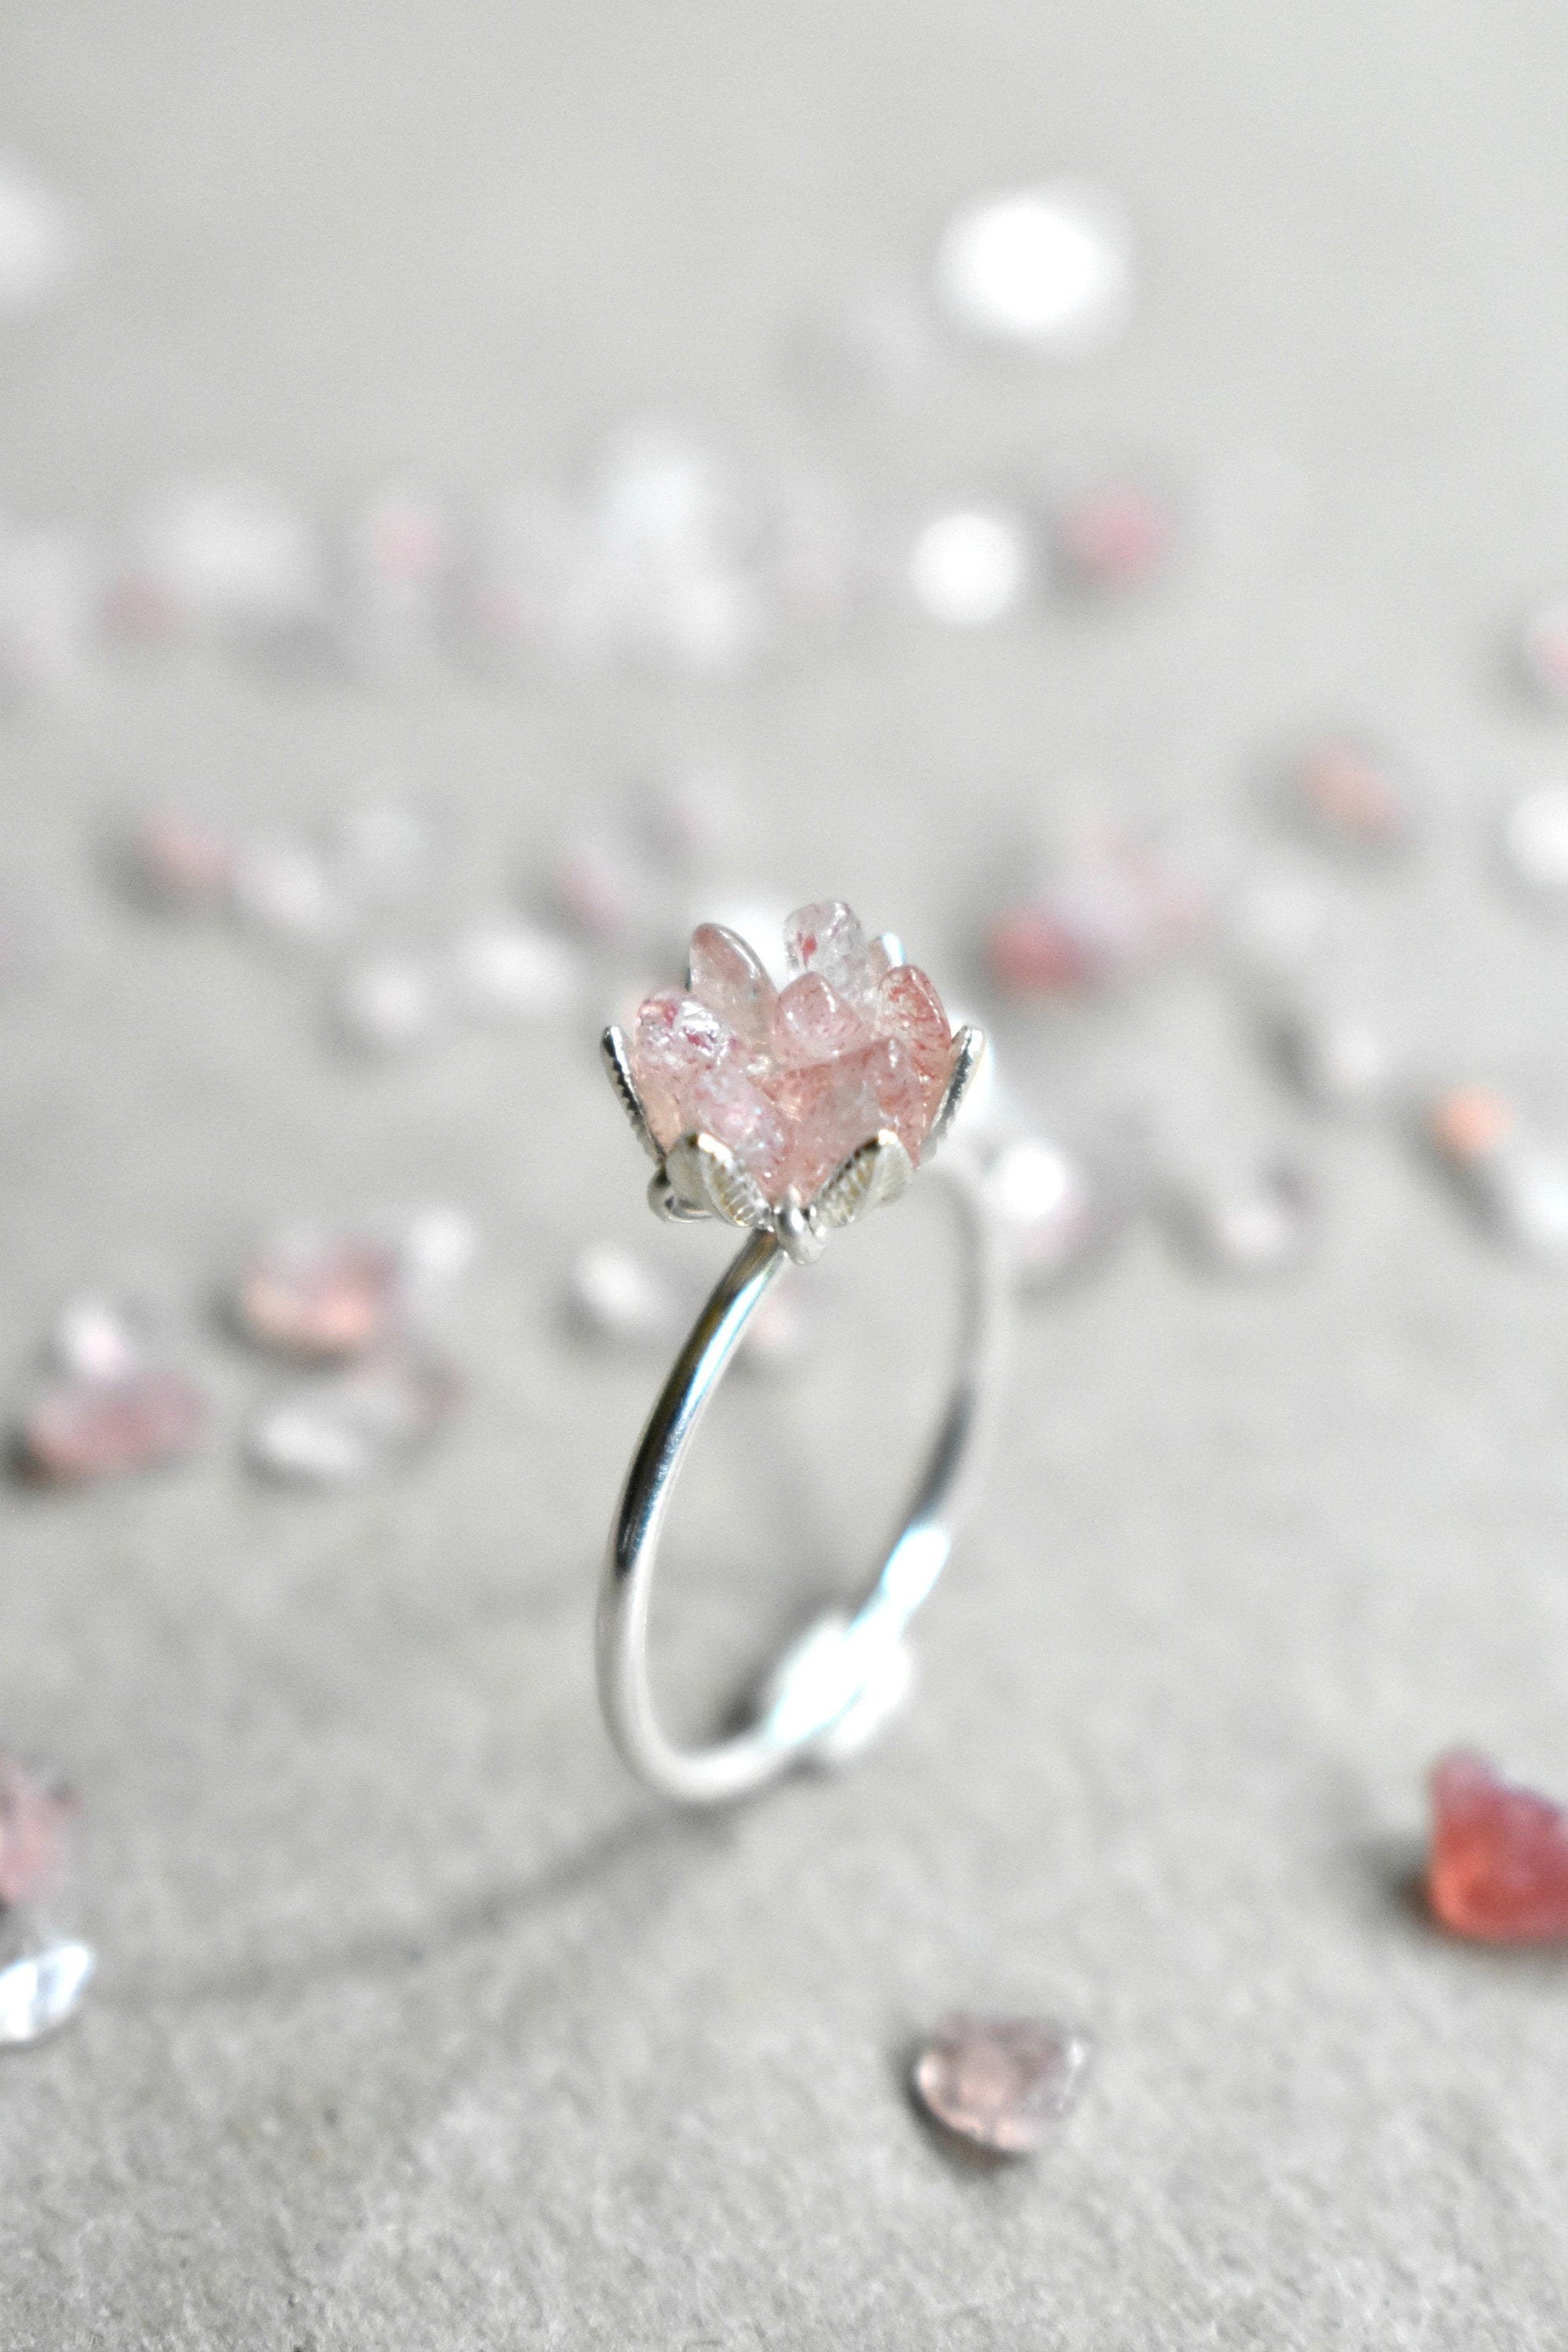 Strawberry Quartz Ring, Pink and Silver Jewelry, Pink Crystal Engagement Ring, Lotus Flower Ring, Libra and Heart Chakra Valentines Ring